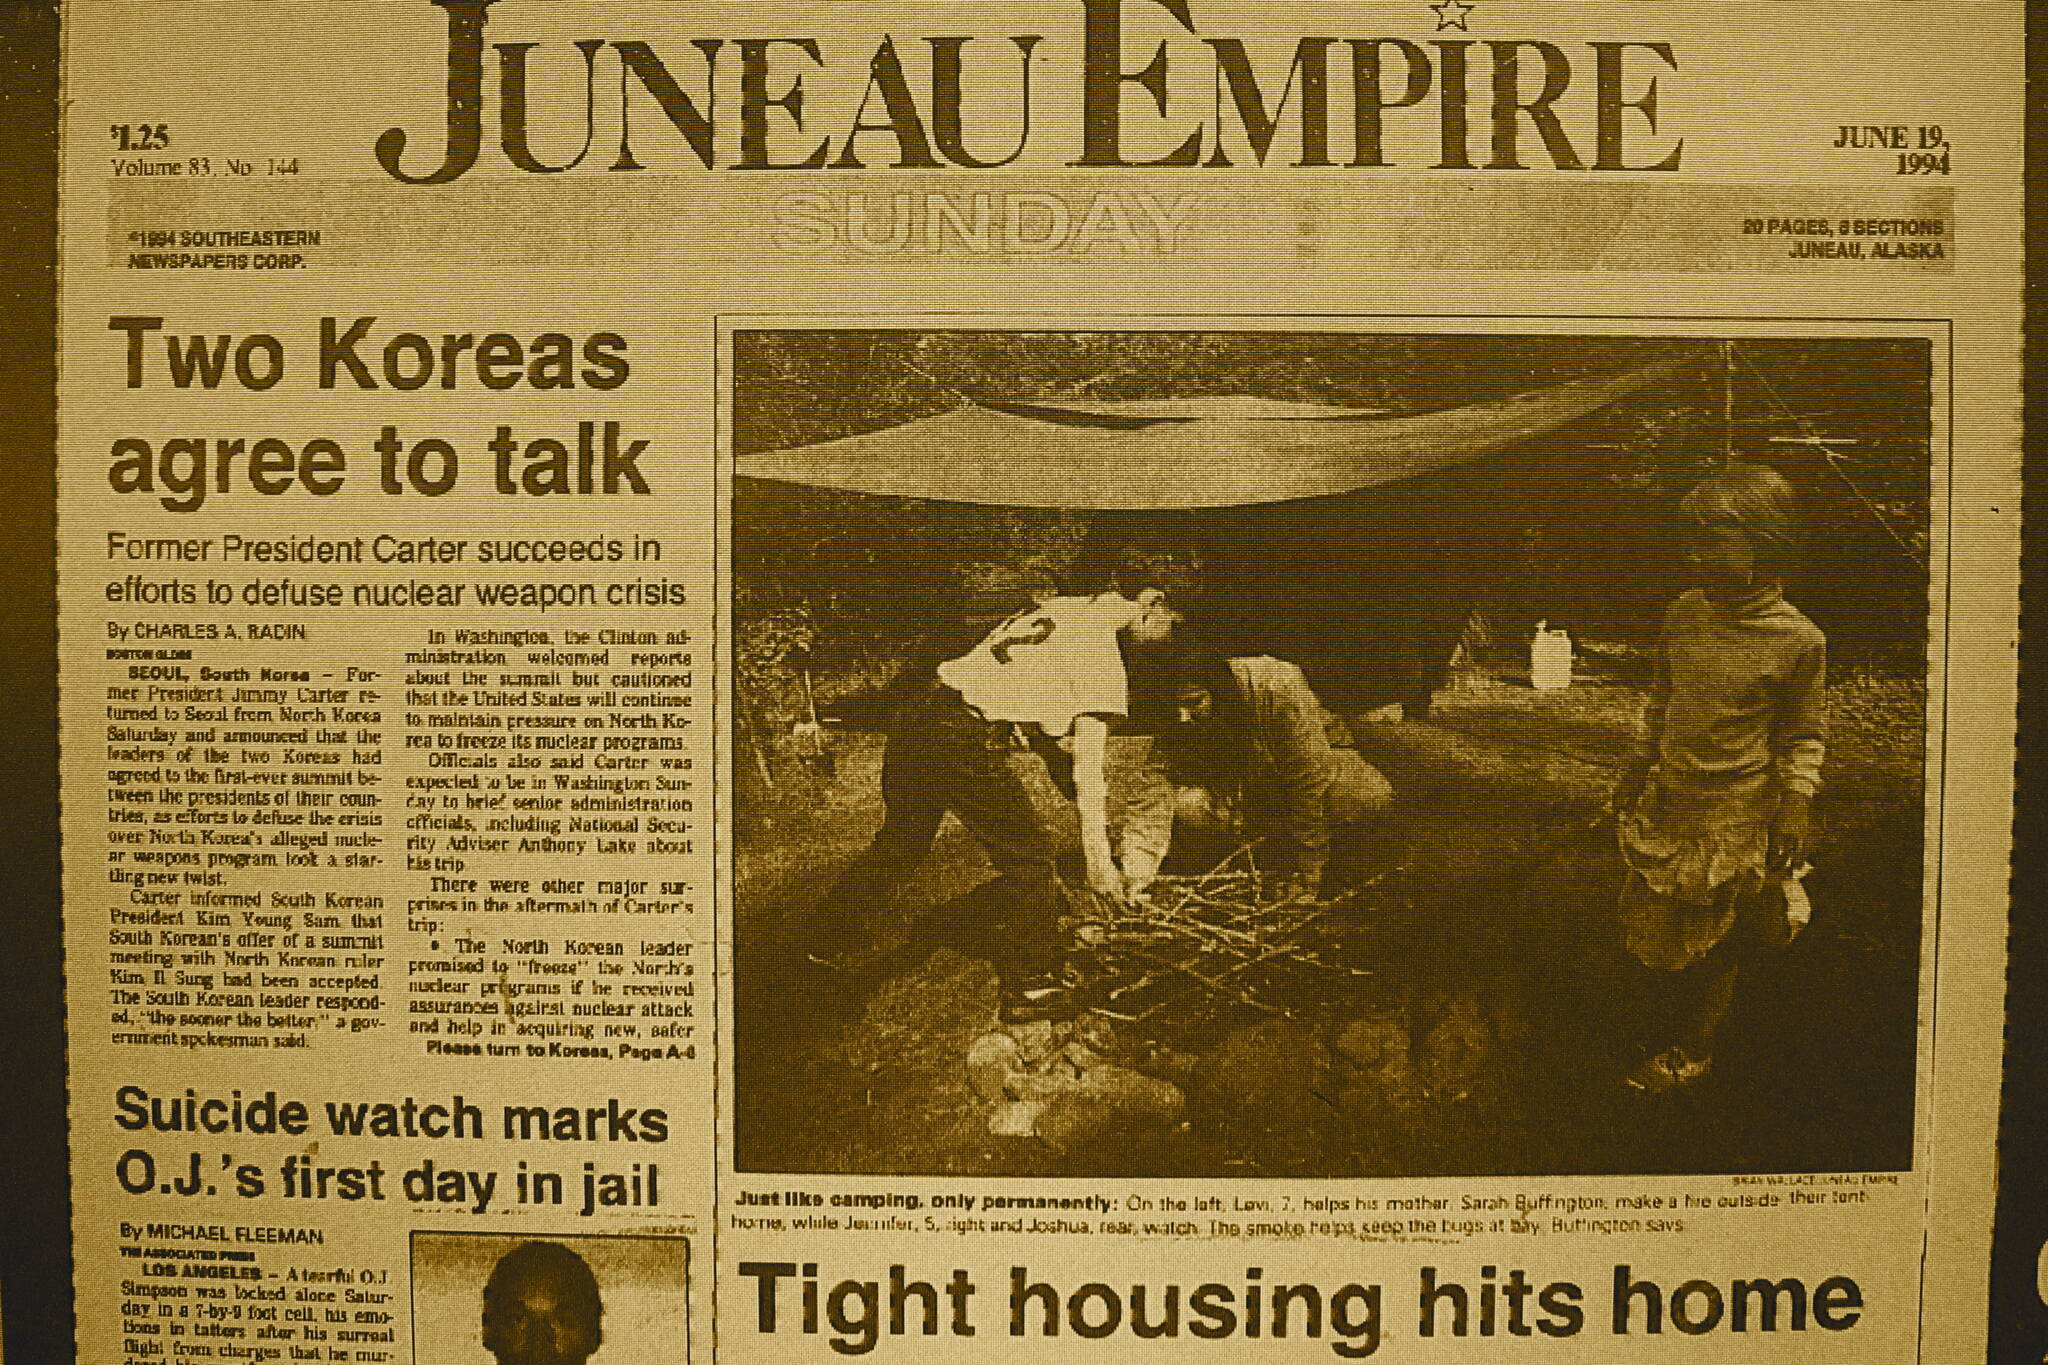 The front page of the Juneau Empire on June 19, 1994. (Mark Sabbatini / Juneau Empire)